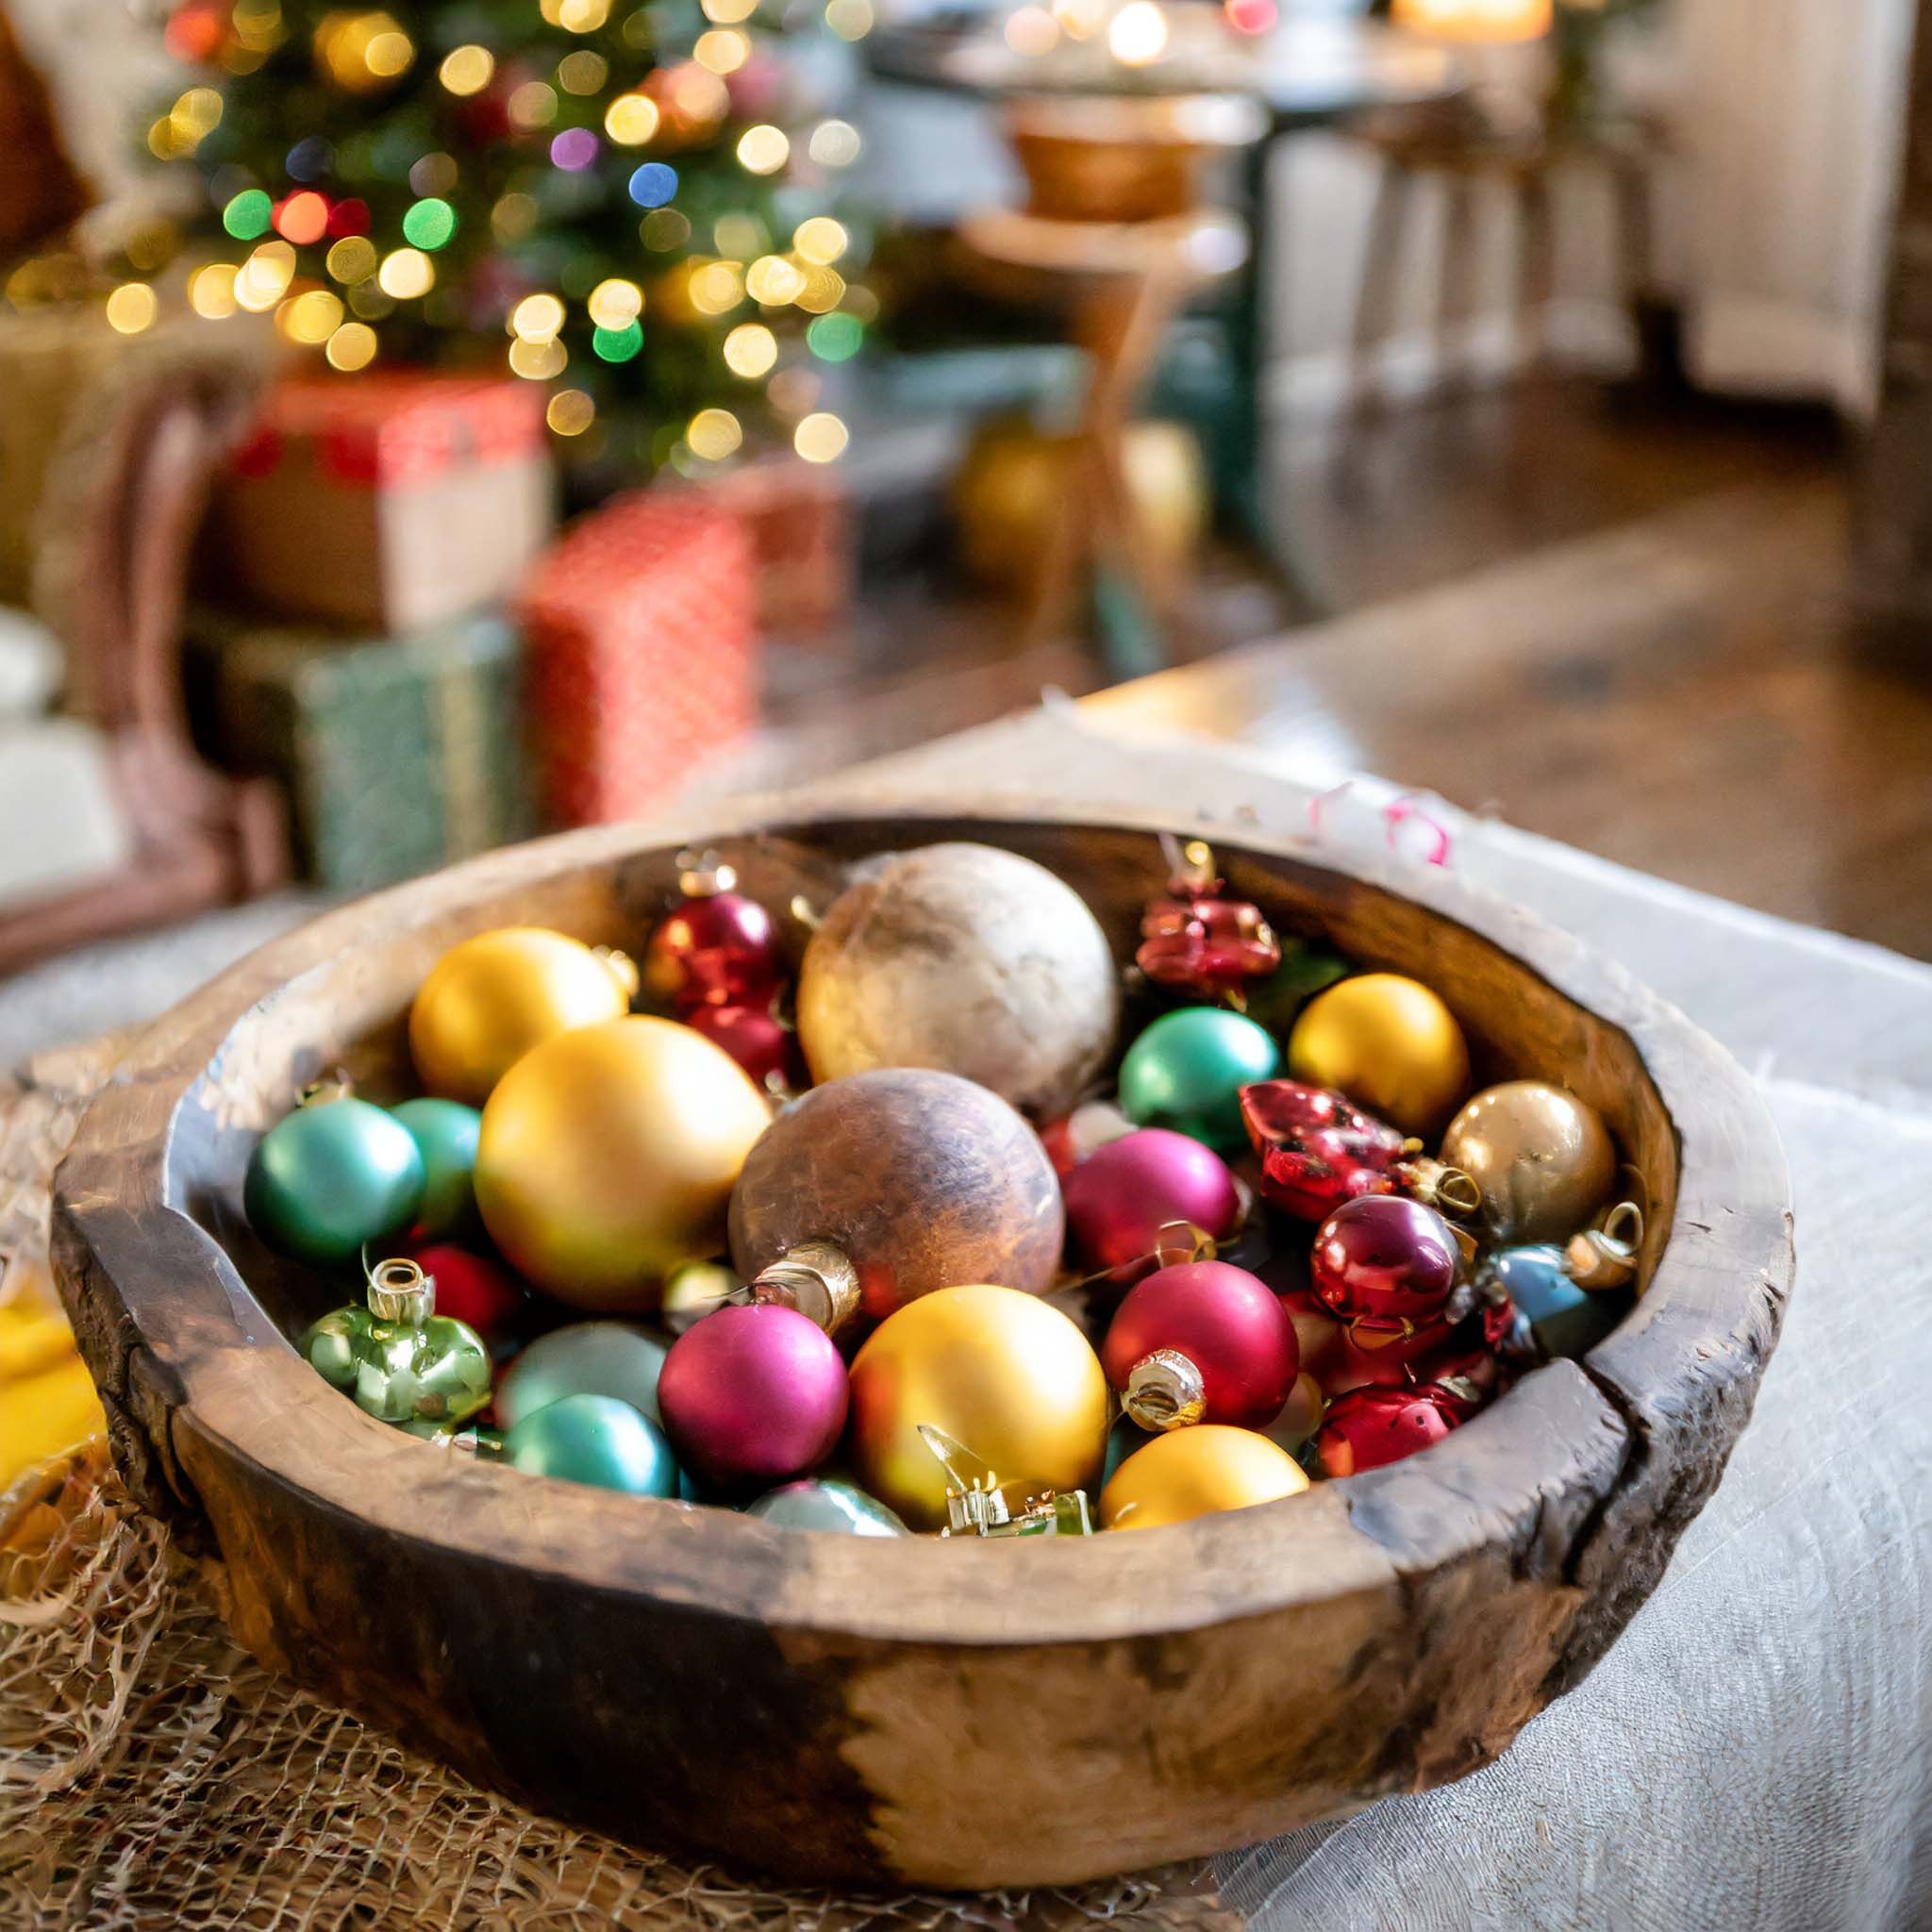 Wooden dough bowl filled with colored ornaments.